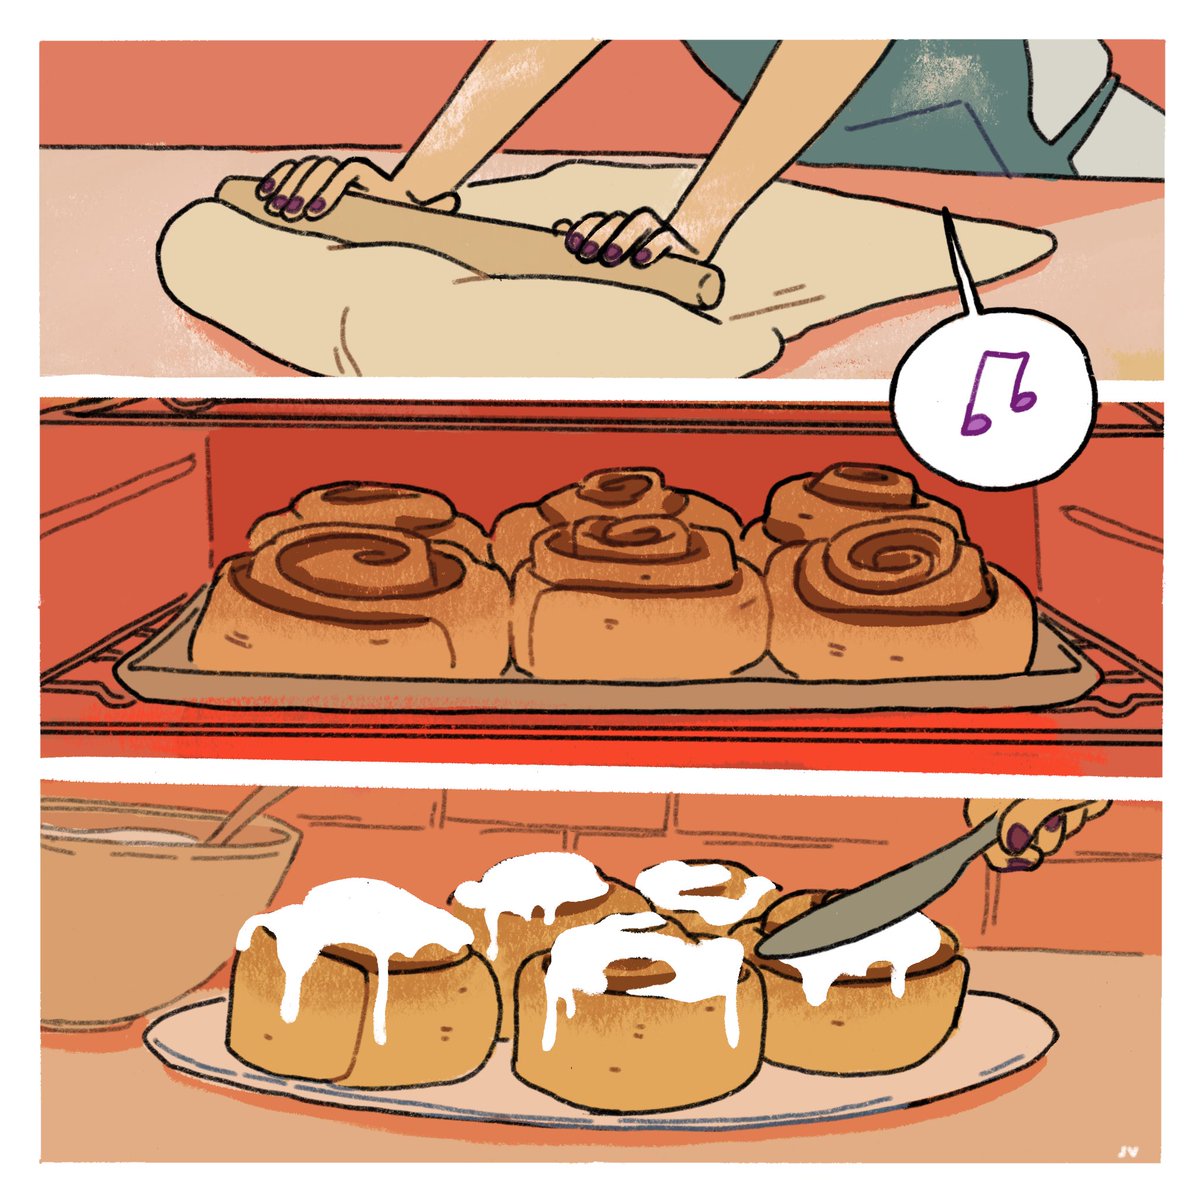 I made cinnamon buns today but they didn’t turn out this good so I drew this to remember the times they DID come out good 